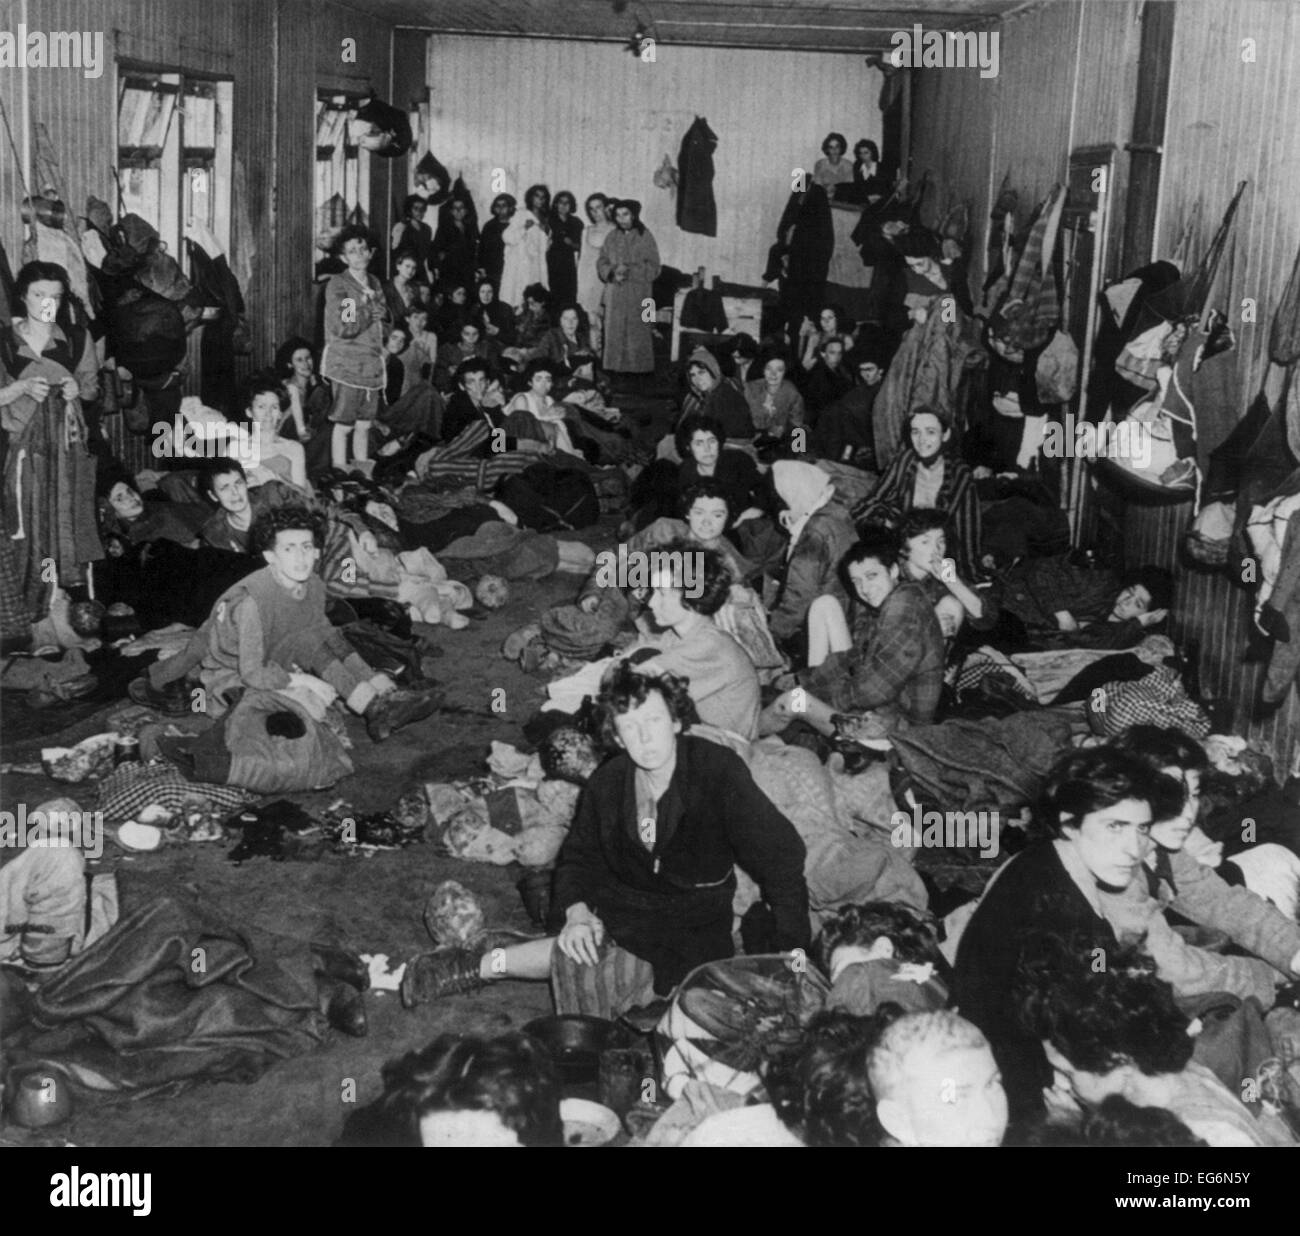 Women and children in a crowd hut in 1943 Bergen-Belsen concentration camp. It was an 'exchange camp', where Jewish hostages Stock Photo